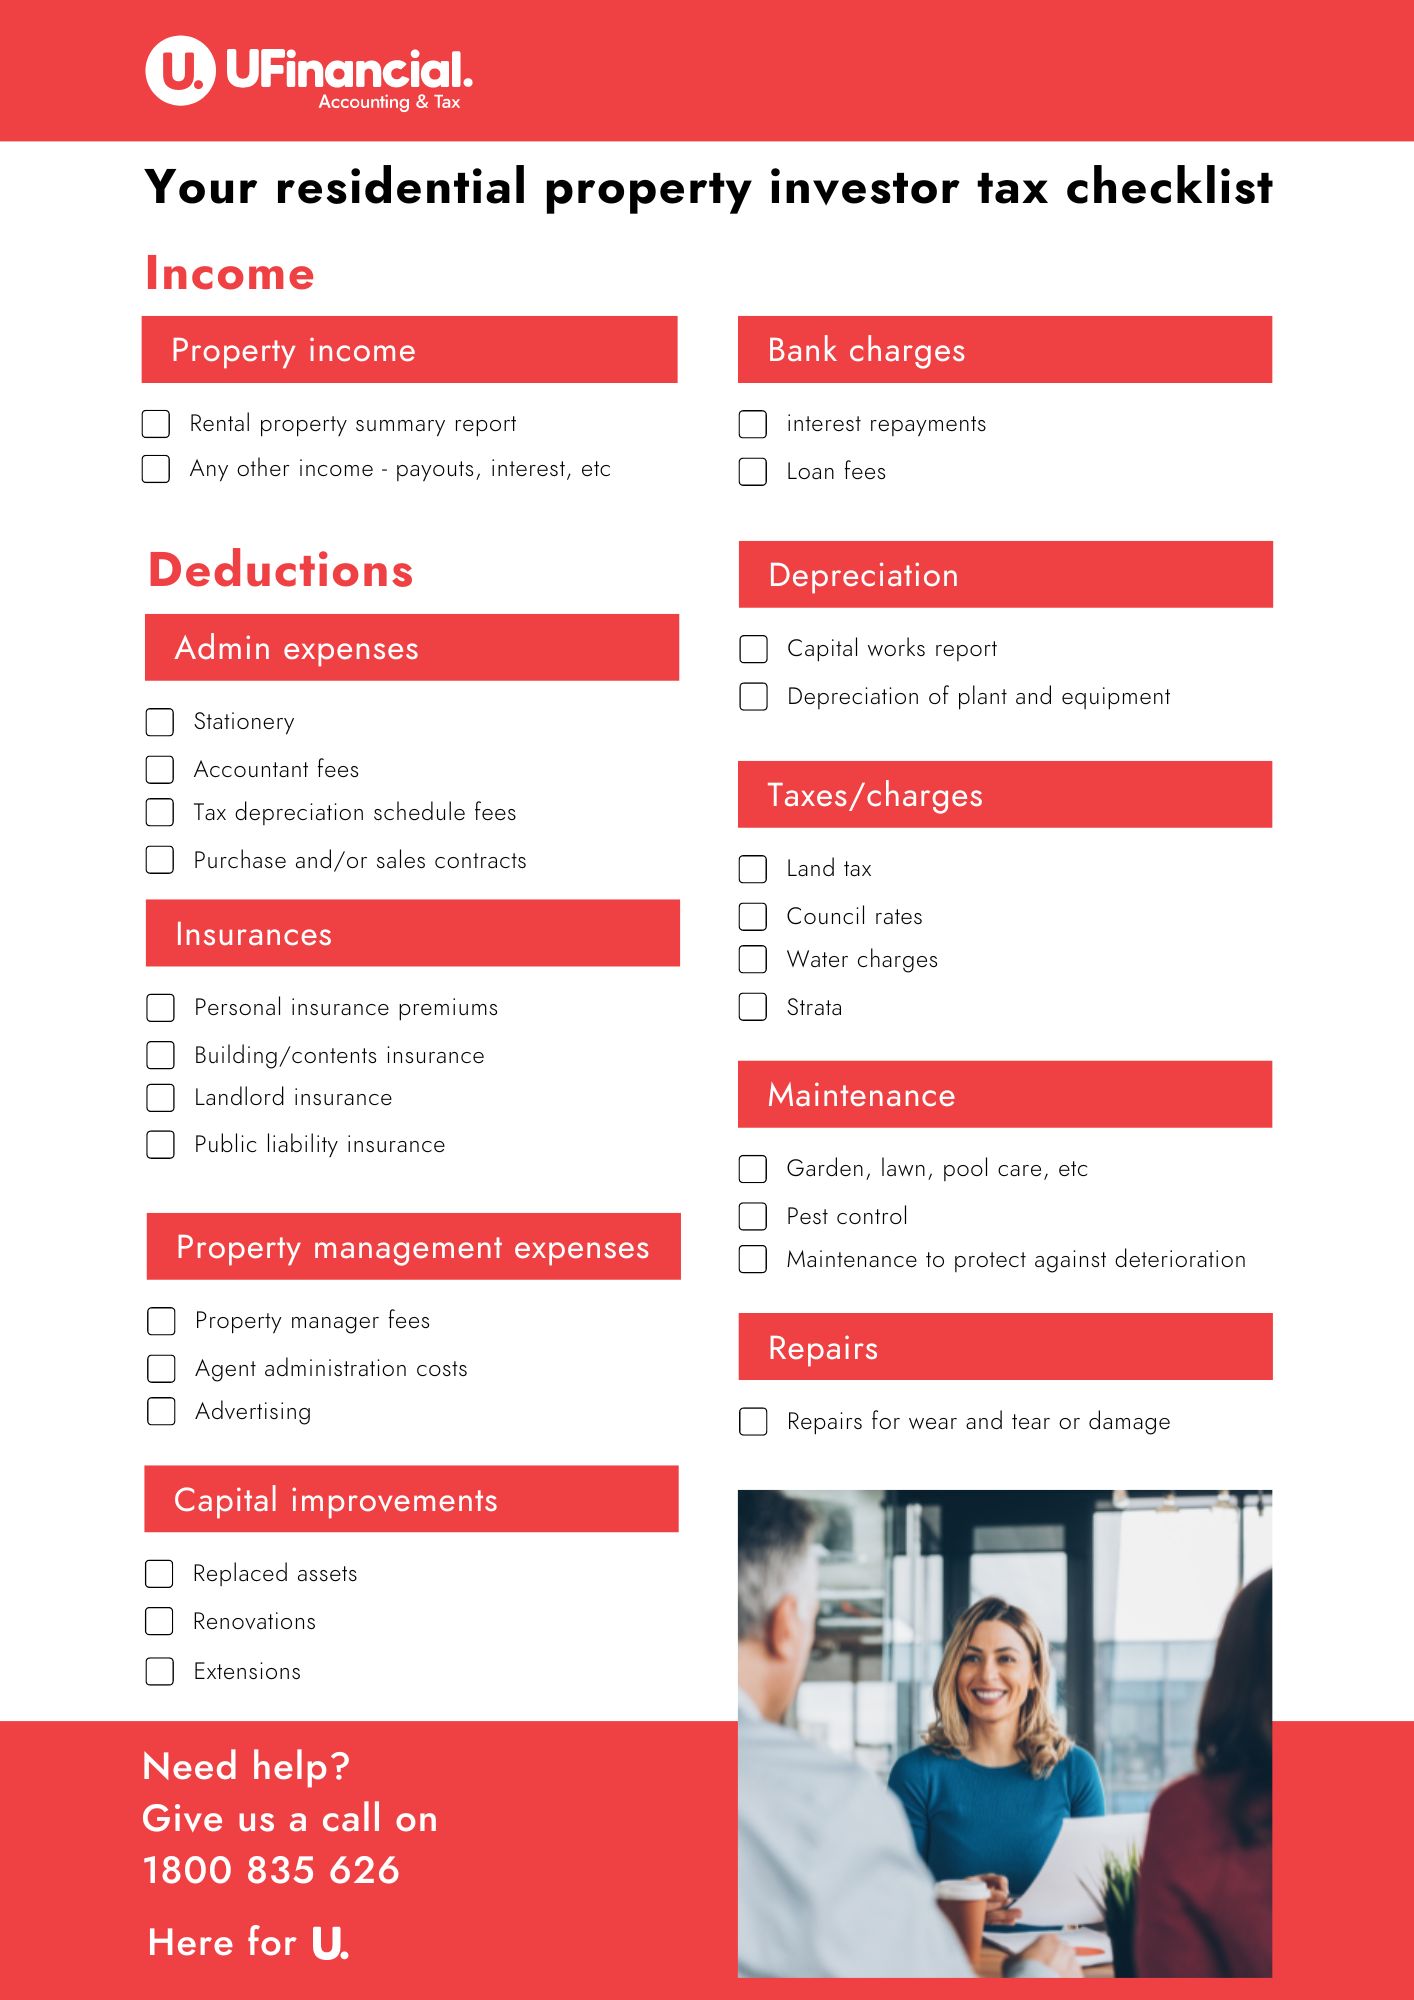 Download your property investor tax checklist